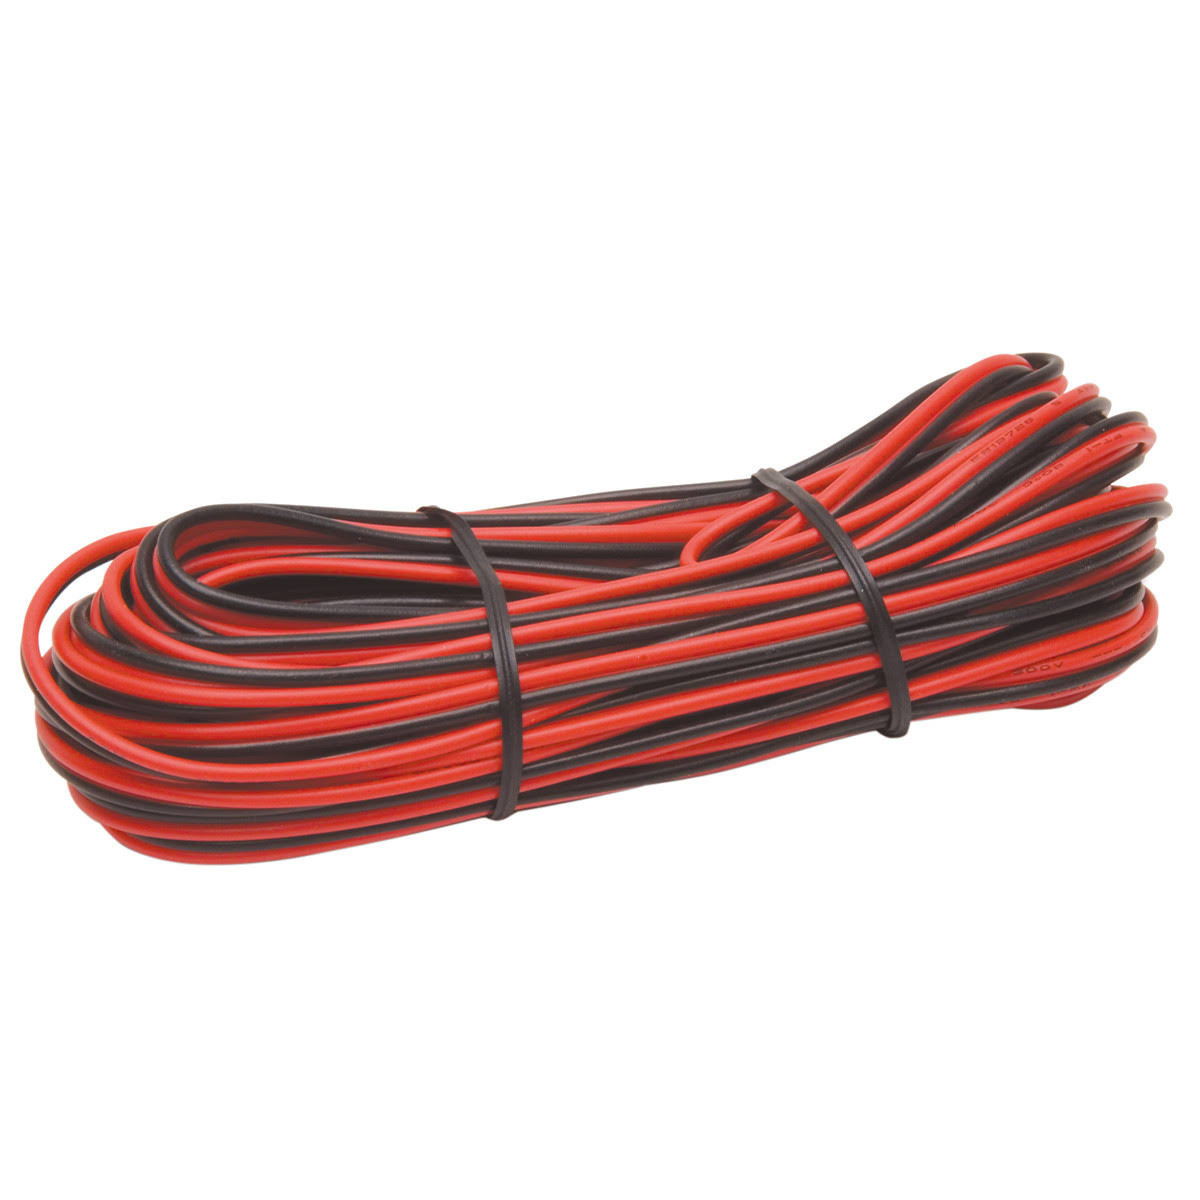 Roadpro Hardwire Replacement 2 Wire - Red and Black, 22', 22 Gauge